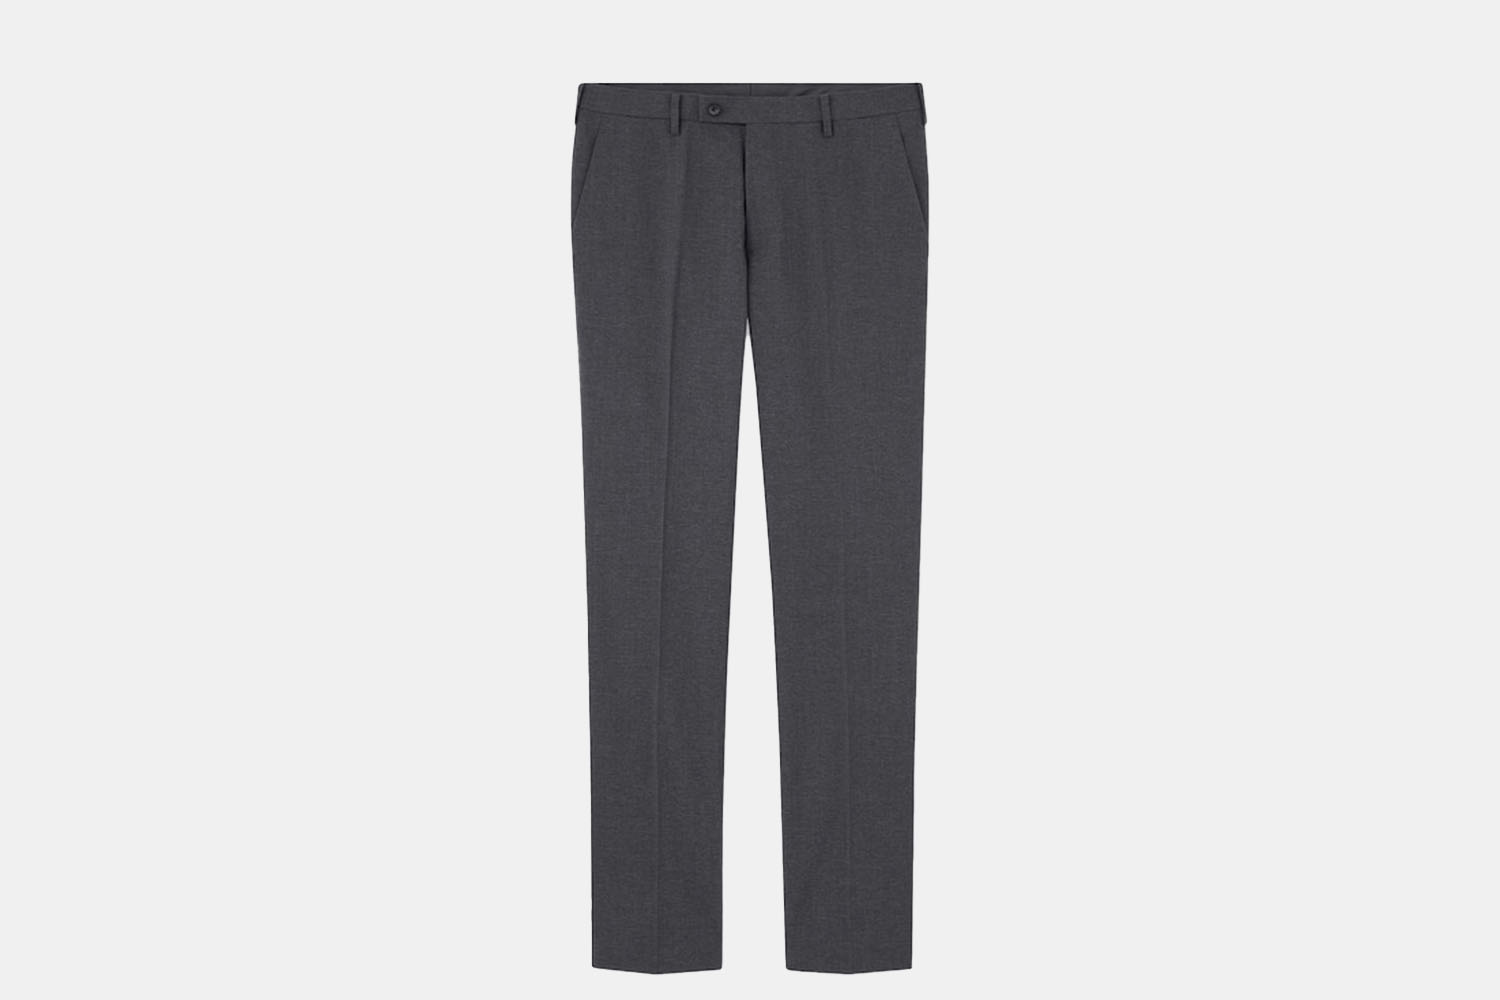 Uniqlos Comfortable Dress Pants Are 25 Off For the Back to Work Charge   InsideHook